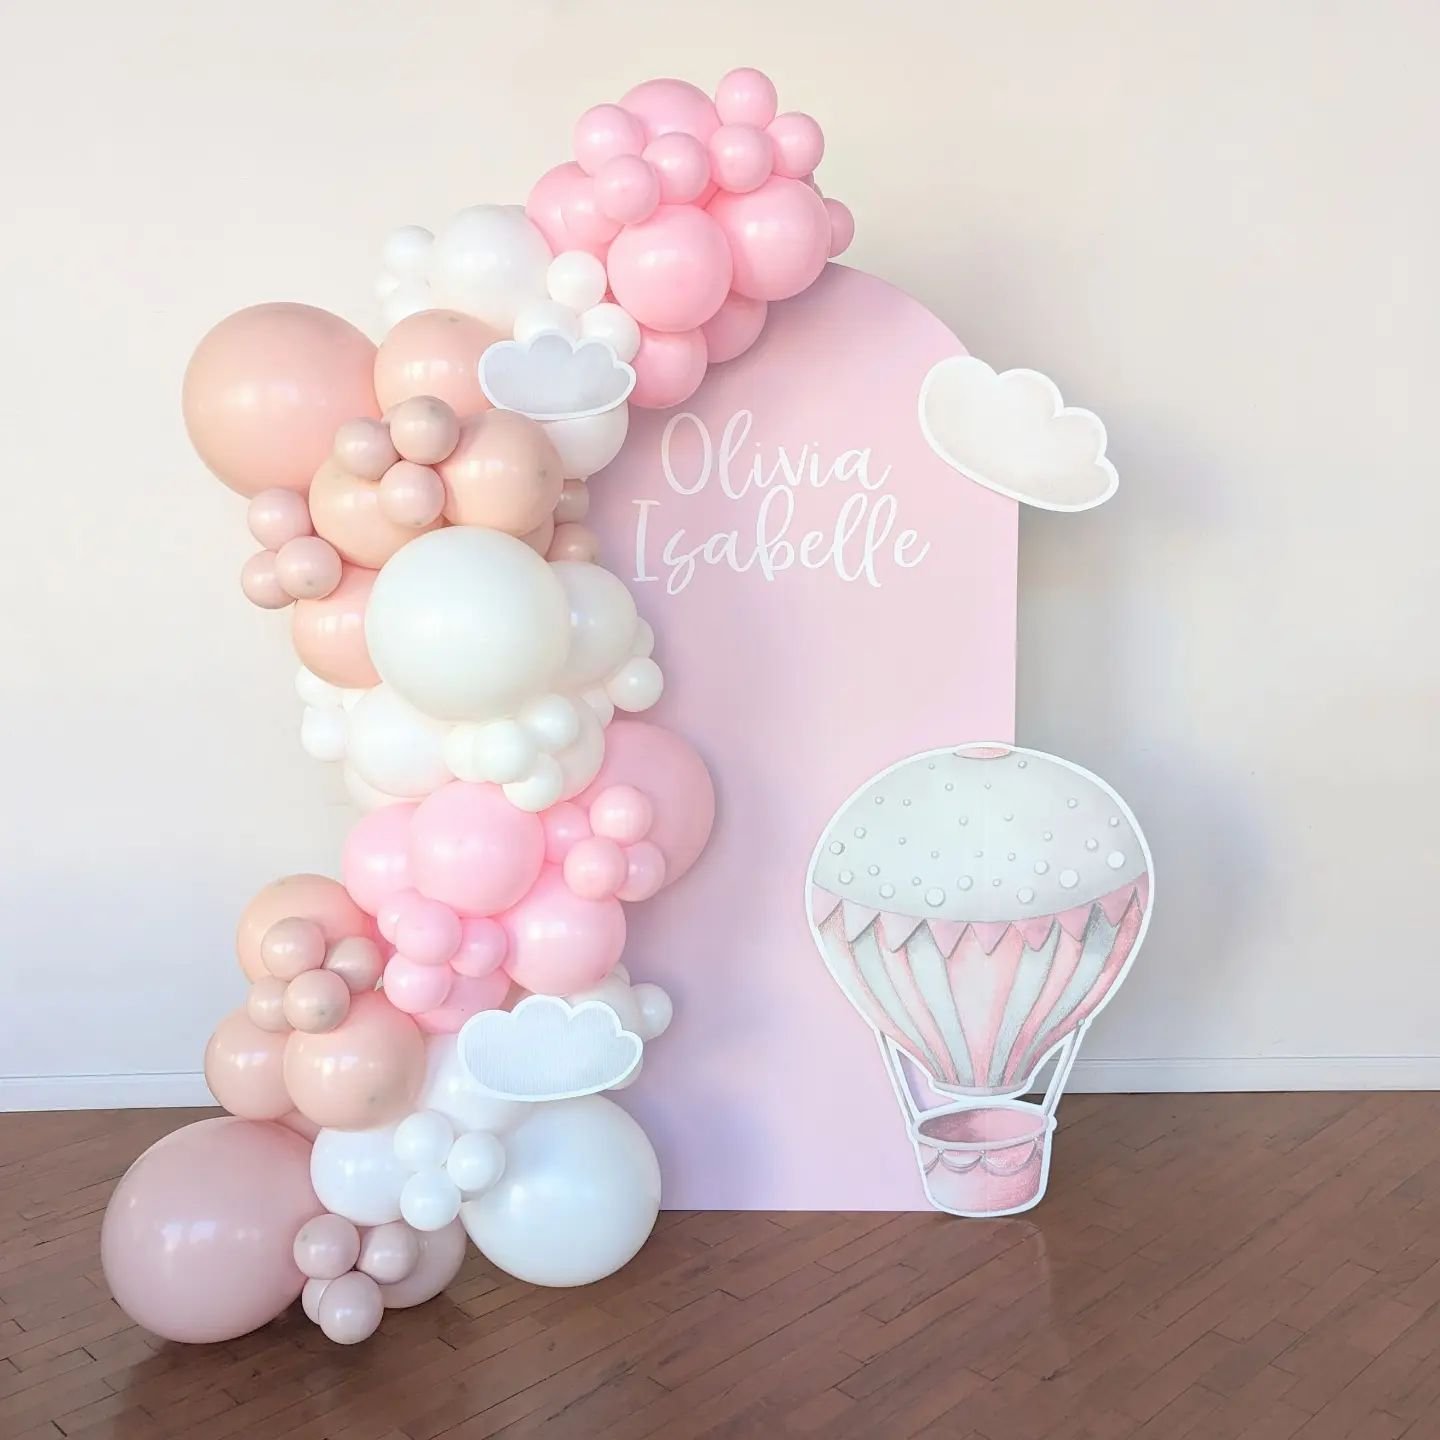 Hot air balloons are big this year and we're here for it 🙌 
Backdrop + balloons + decal @modbouncehouseil 
Venue @elementspreserved 

#hotairballoon #hotairballoonparty #hotairballoontheme #hotairballoondecor #ohtheplacesyoullgo #upupandaway #babysh